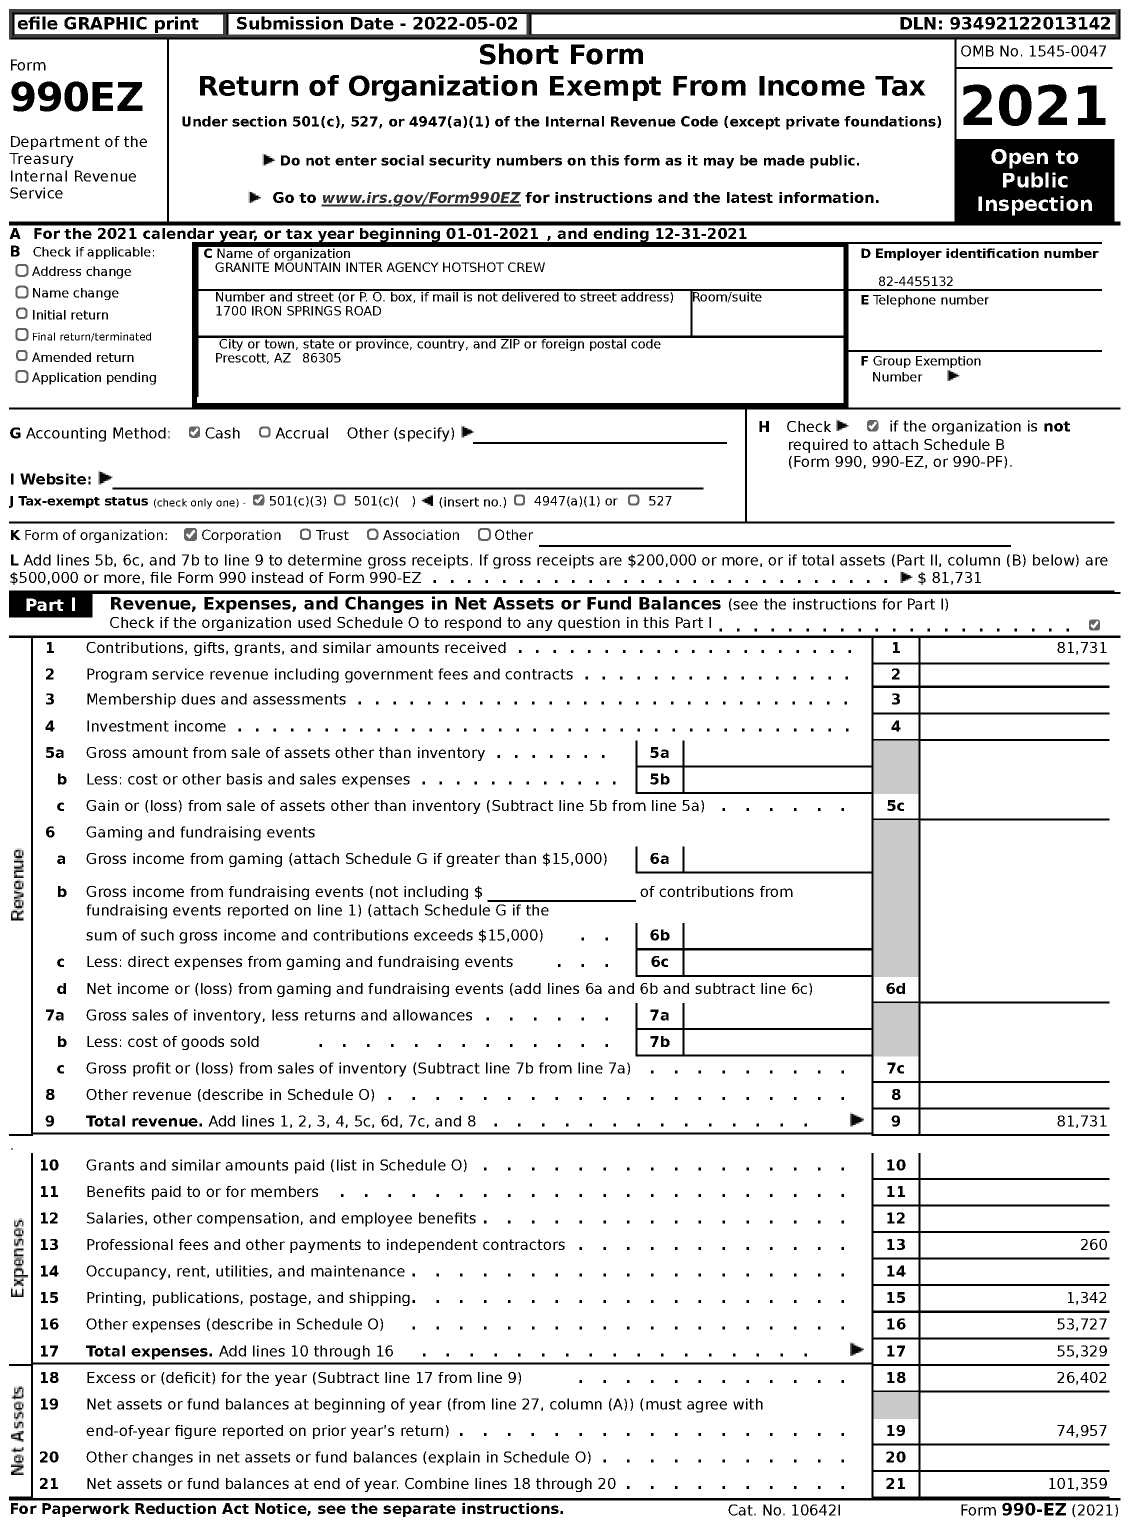 Image of first page of 2021 Form 990EZ for Granite Mountain Inter Agency Hotshot Crew